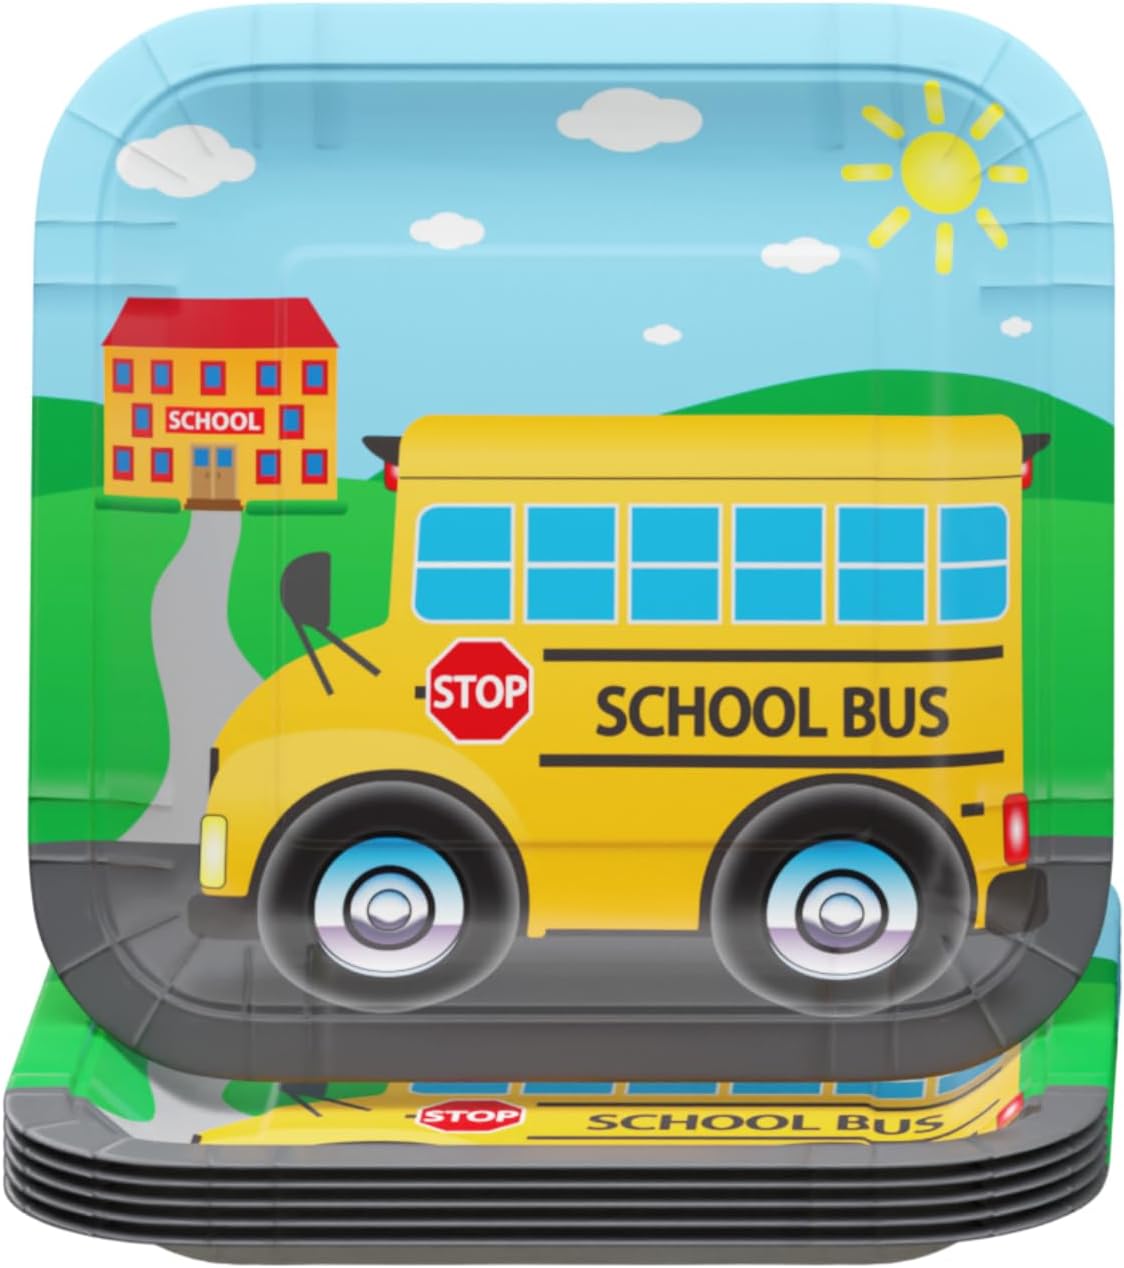 Set of 'School Bus 7' Dessert Plates featuring a school bus design, ideal for birthday parties or school-themed celebrations.